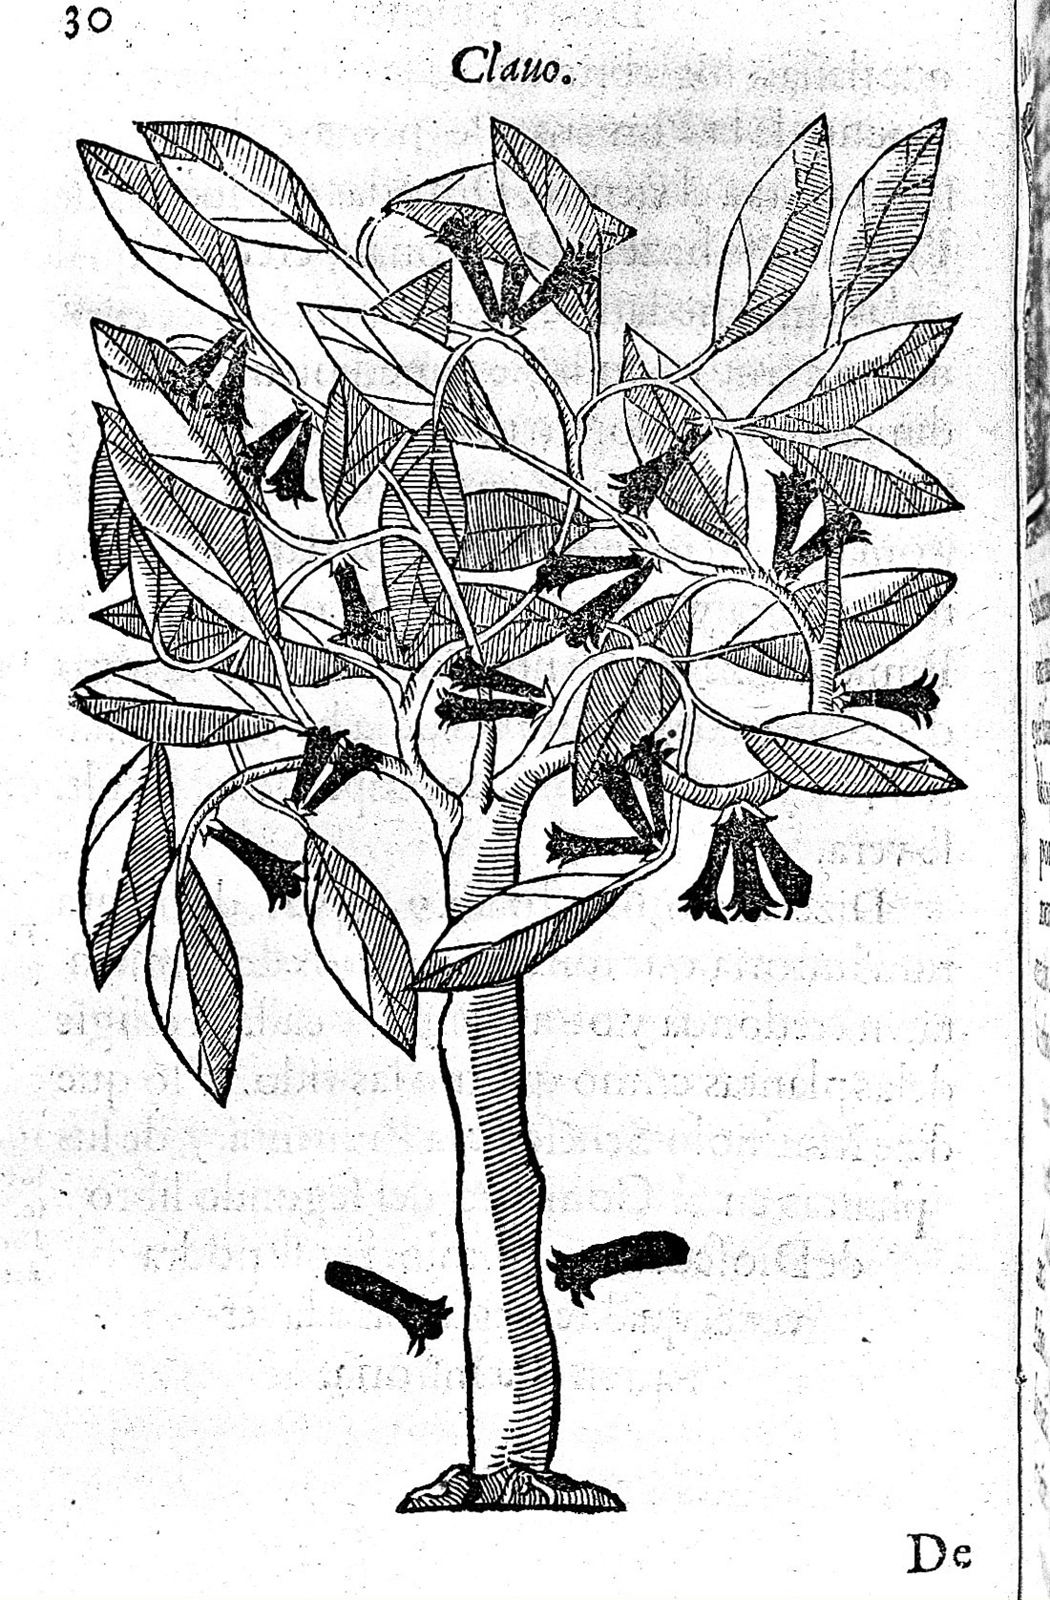 Photograph of a single page from a book showing a page-size, black and white engraving of a plant.